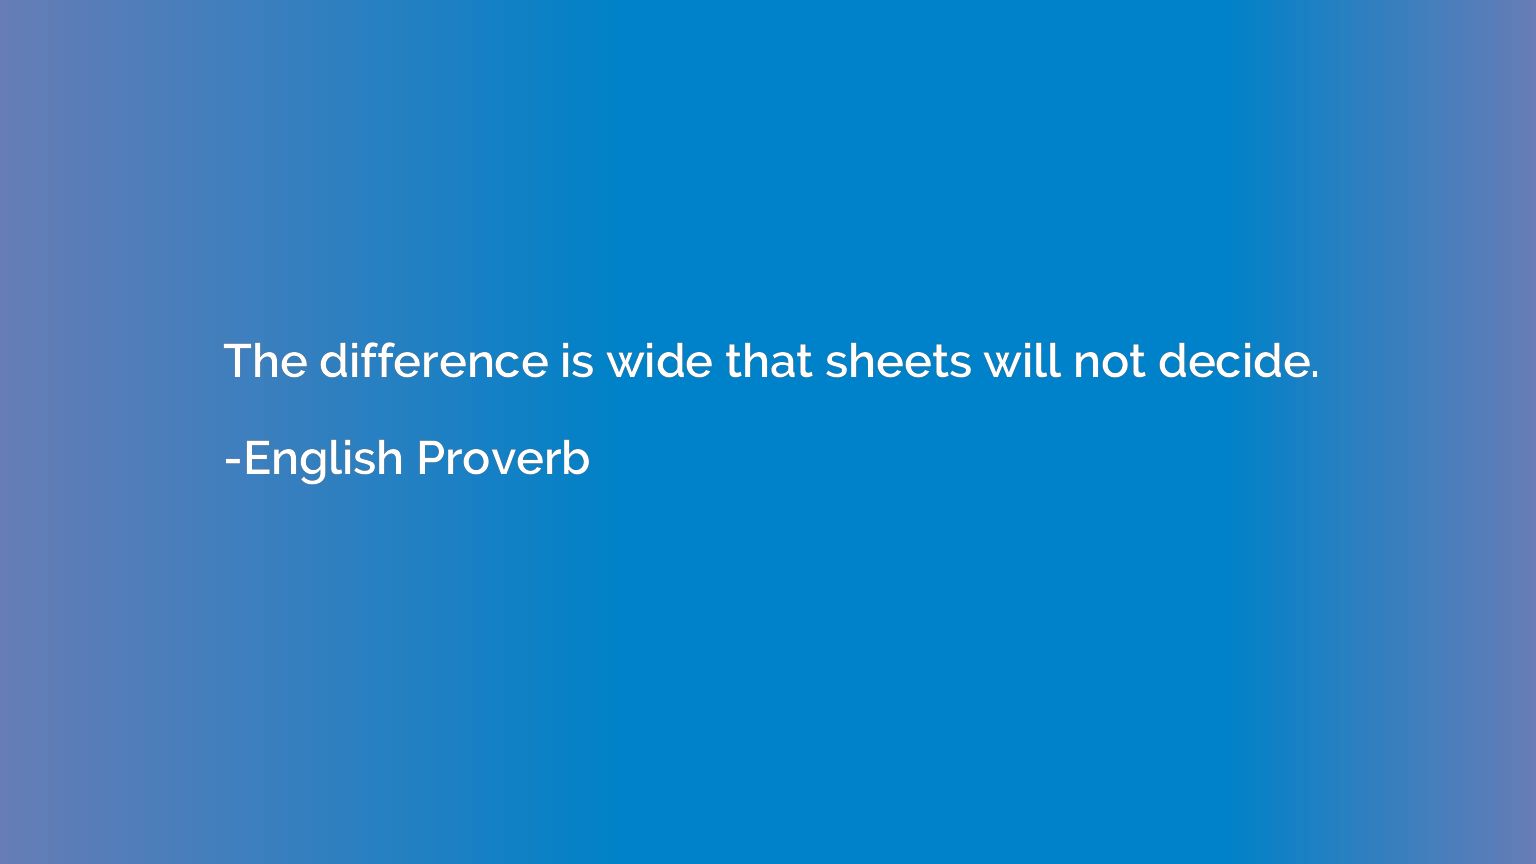 The difference is wide that sheets will not decide.